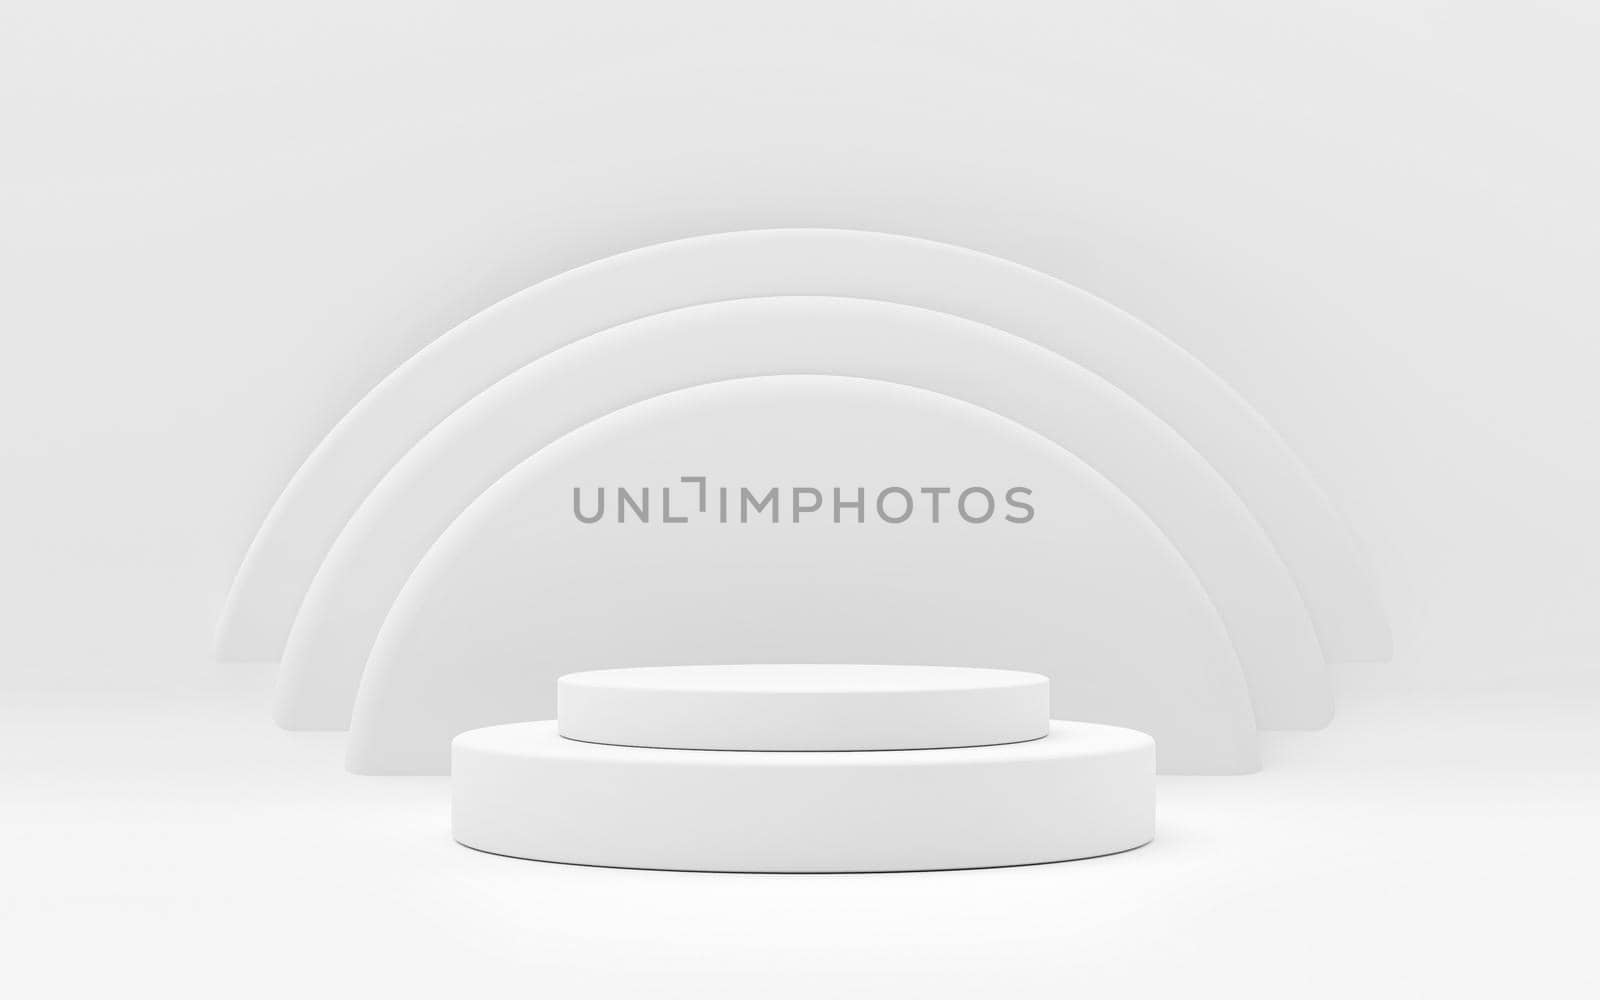 White product stand on white background. Abstract minimal geometry concept. Studio podium platform theme. Exhibition and business marketing presentation stage. 3D illustration rendering graphic design by MiniStocker